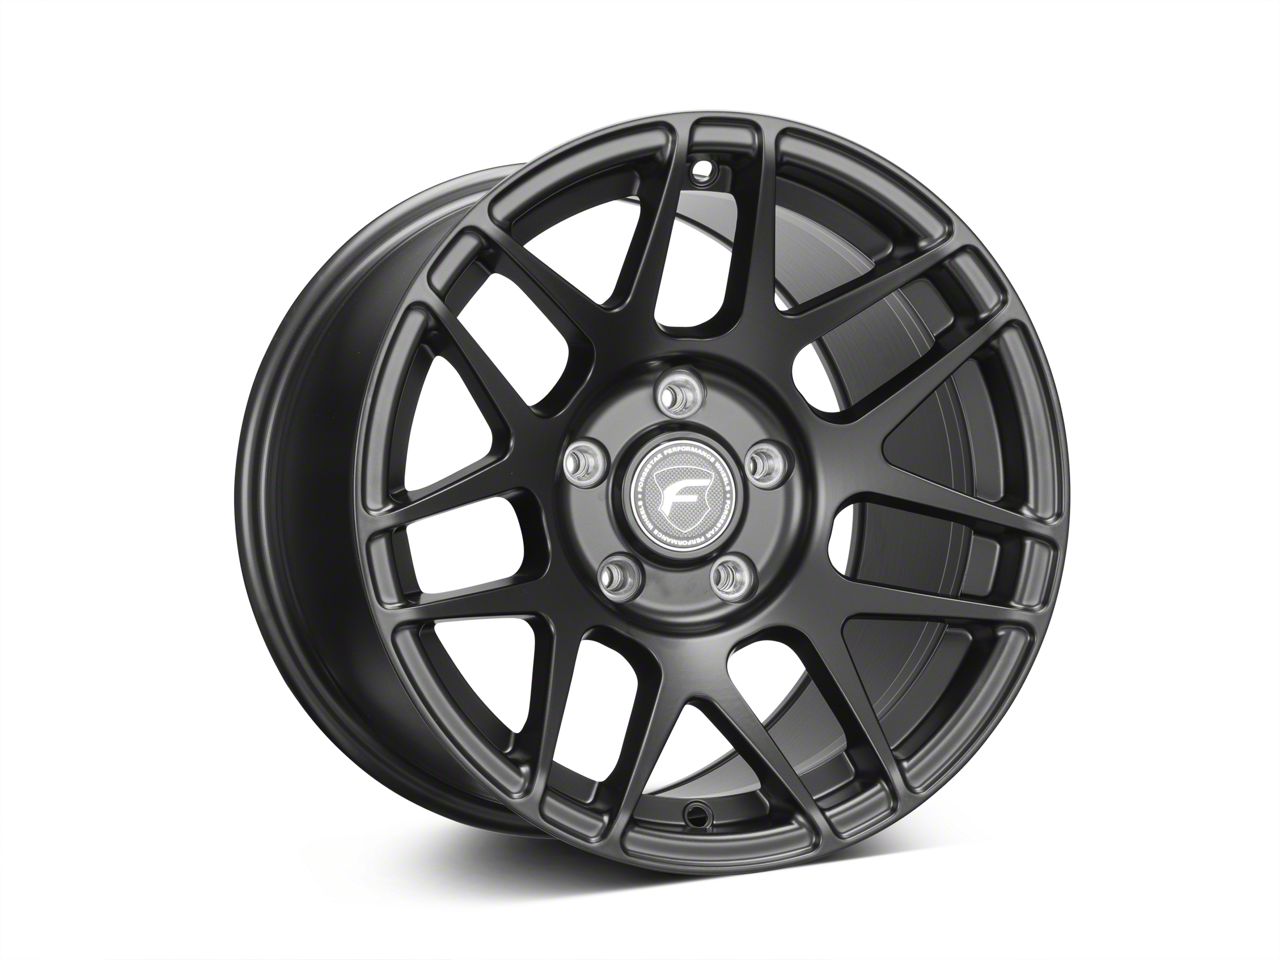 Forgestar Mustang F14 Drag Edition Matte Black Wheel; Front Only; 17x4.5  F1727B567N26 (10-14 Mustang